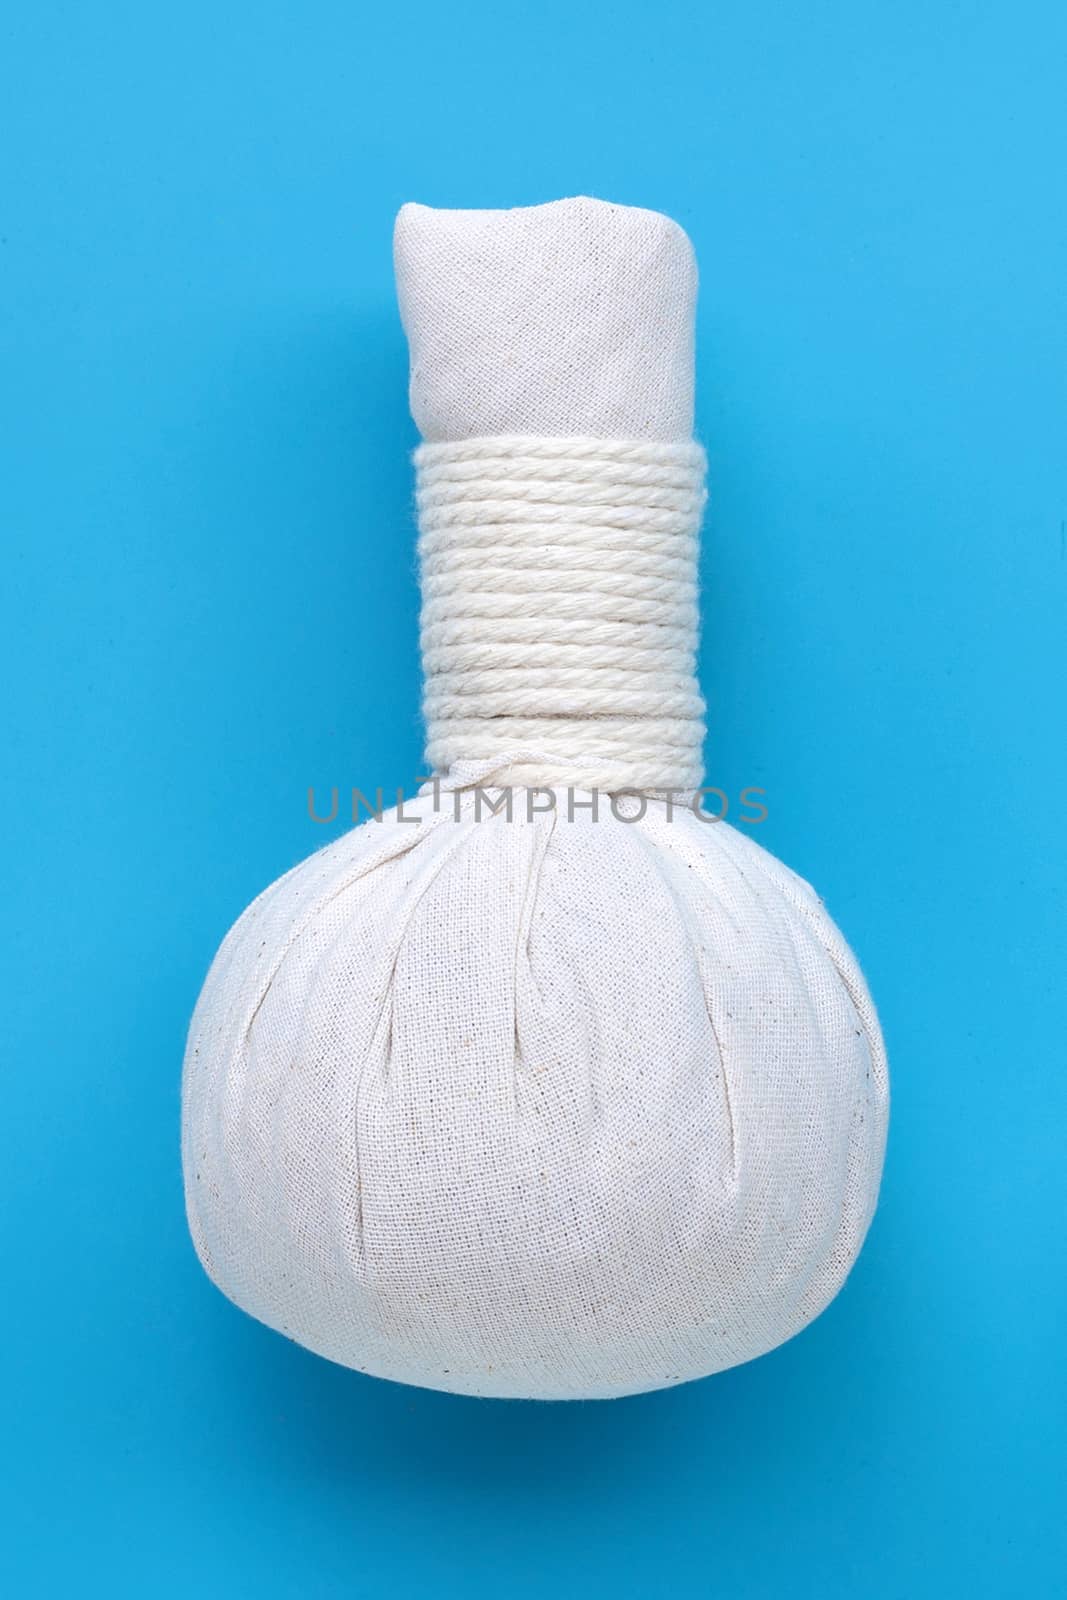 Herbal compress ball for Thai massage and spa treatment  on blue background. 